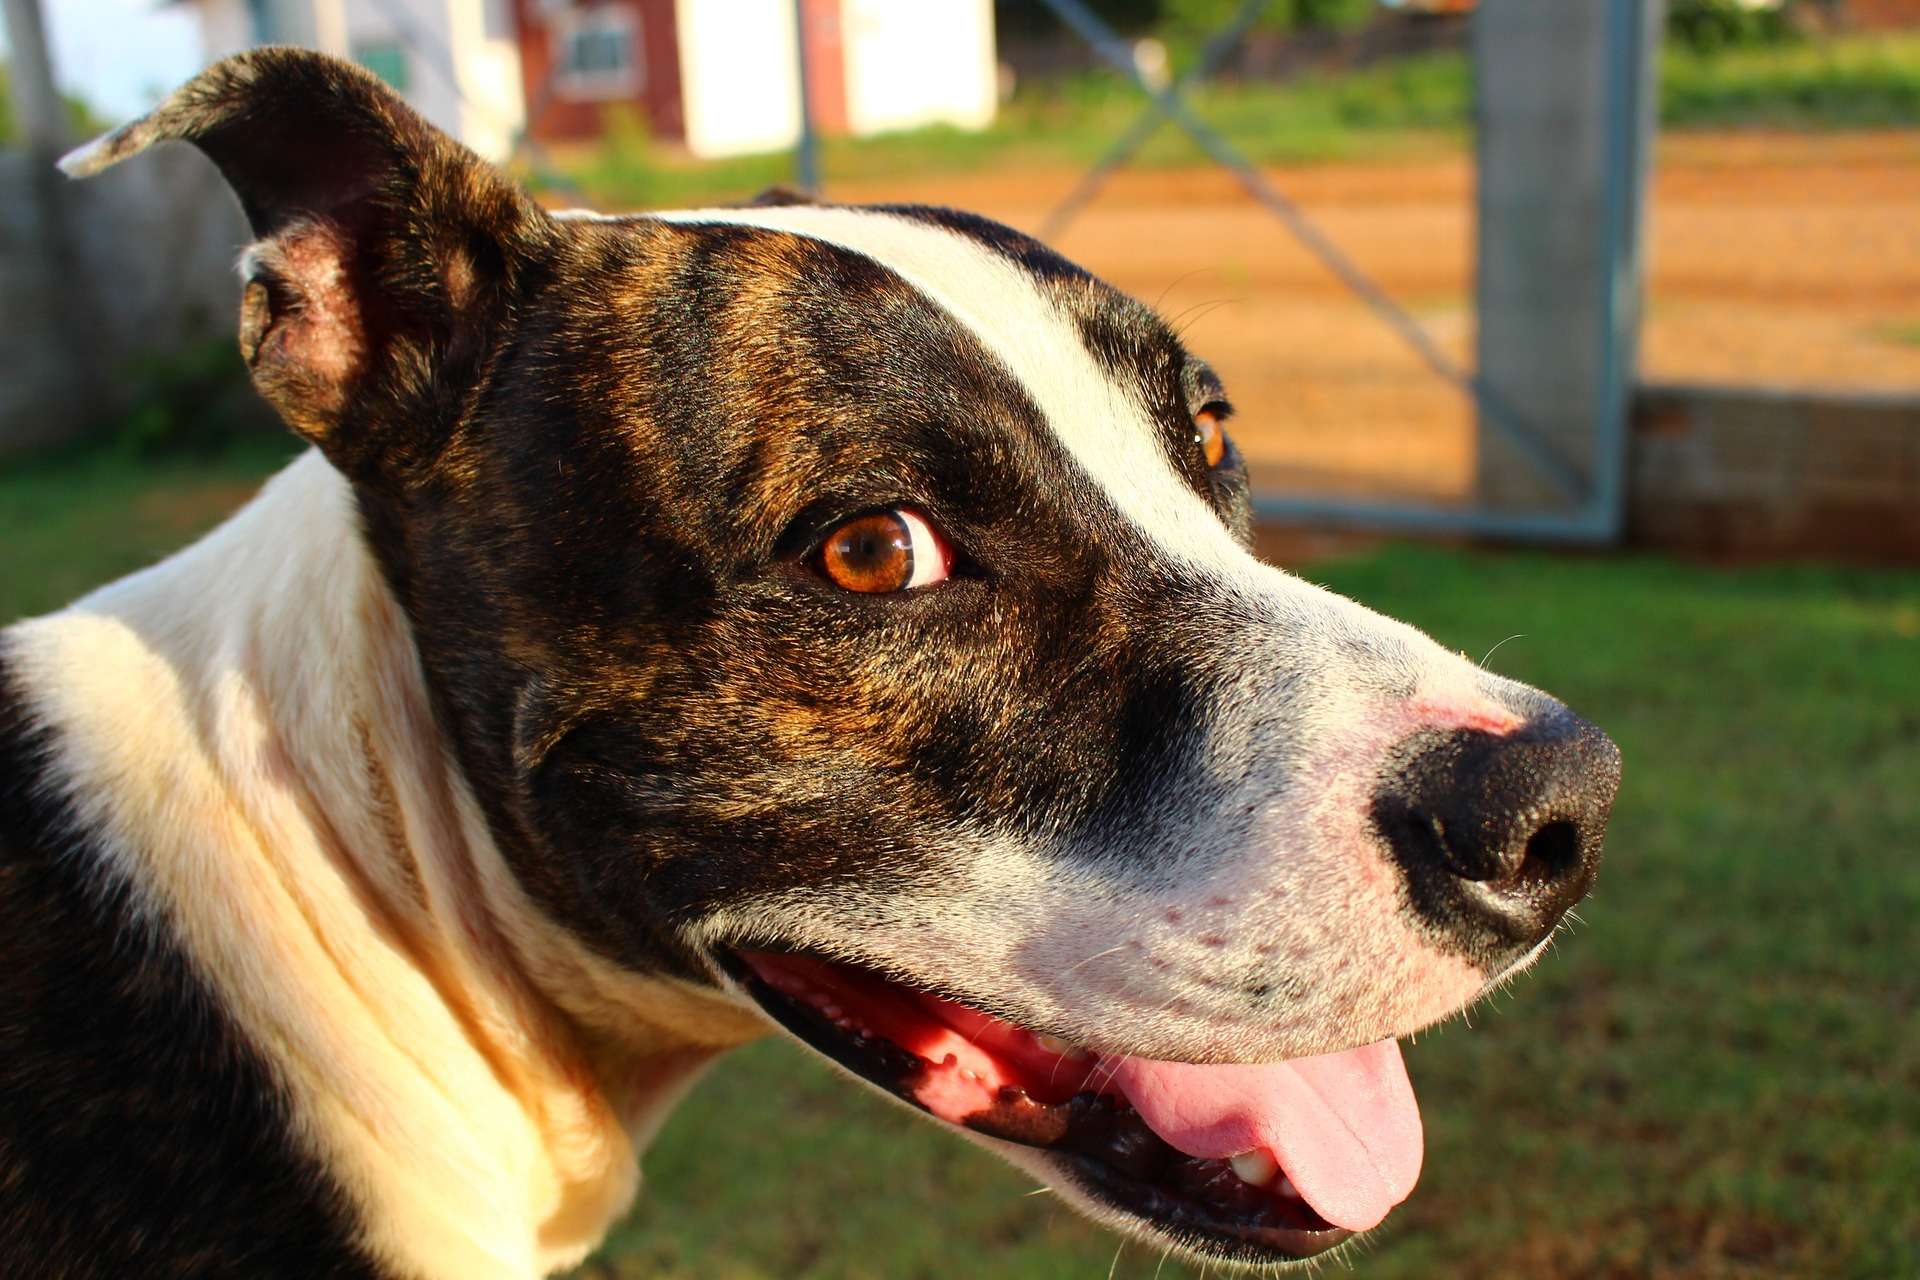 Shelters often mislabel dog breeds. But should we be labeling them at all?